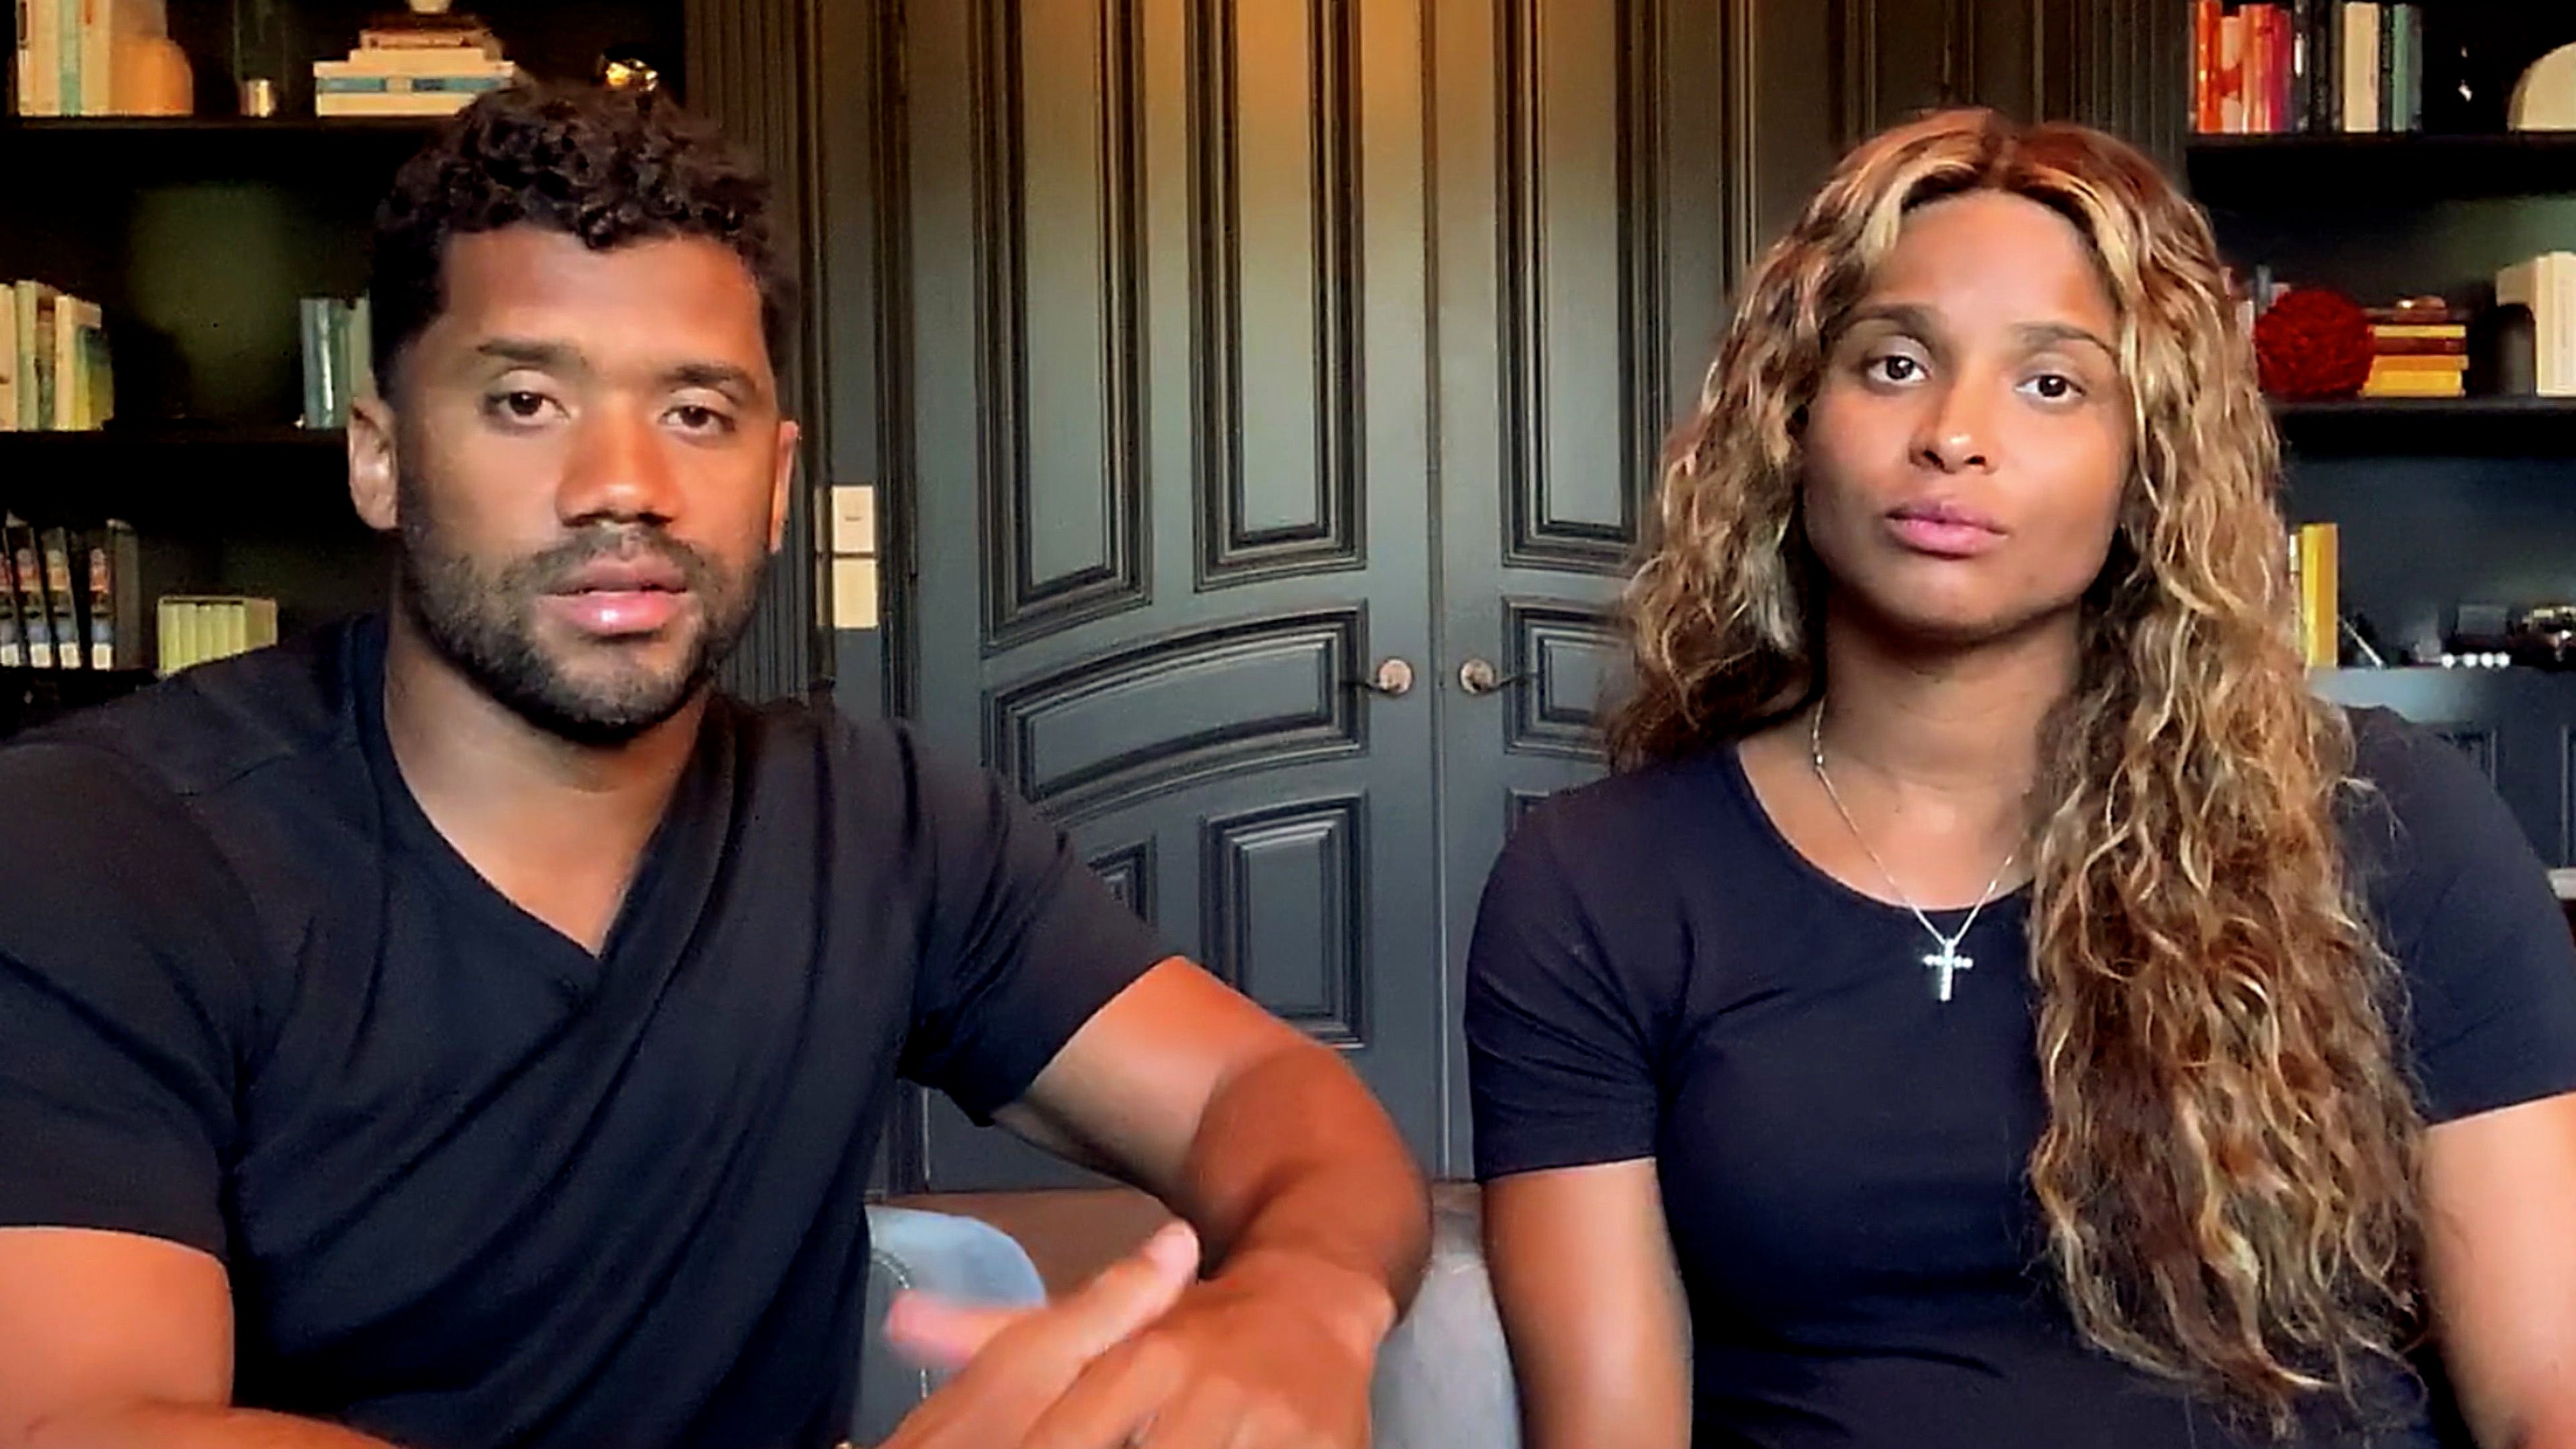 Russell Wilson and Ciara pictured at home in June 2020.